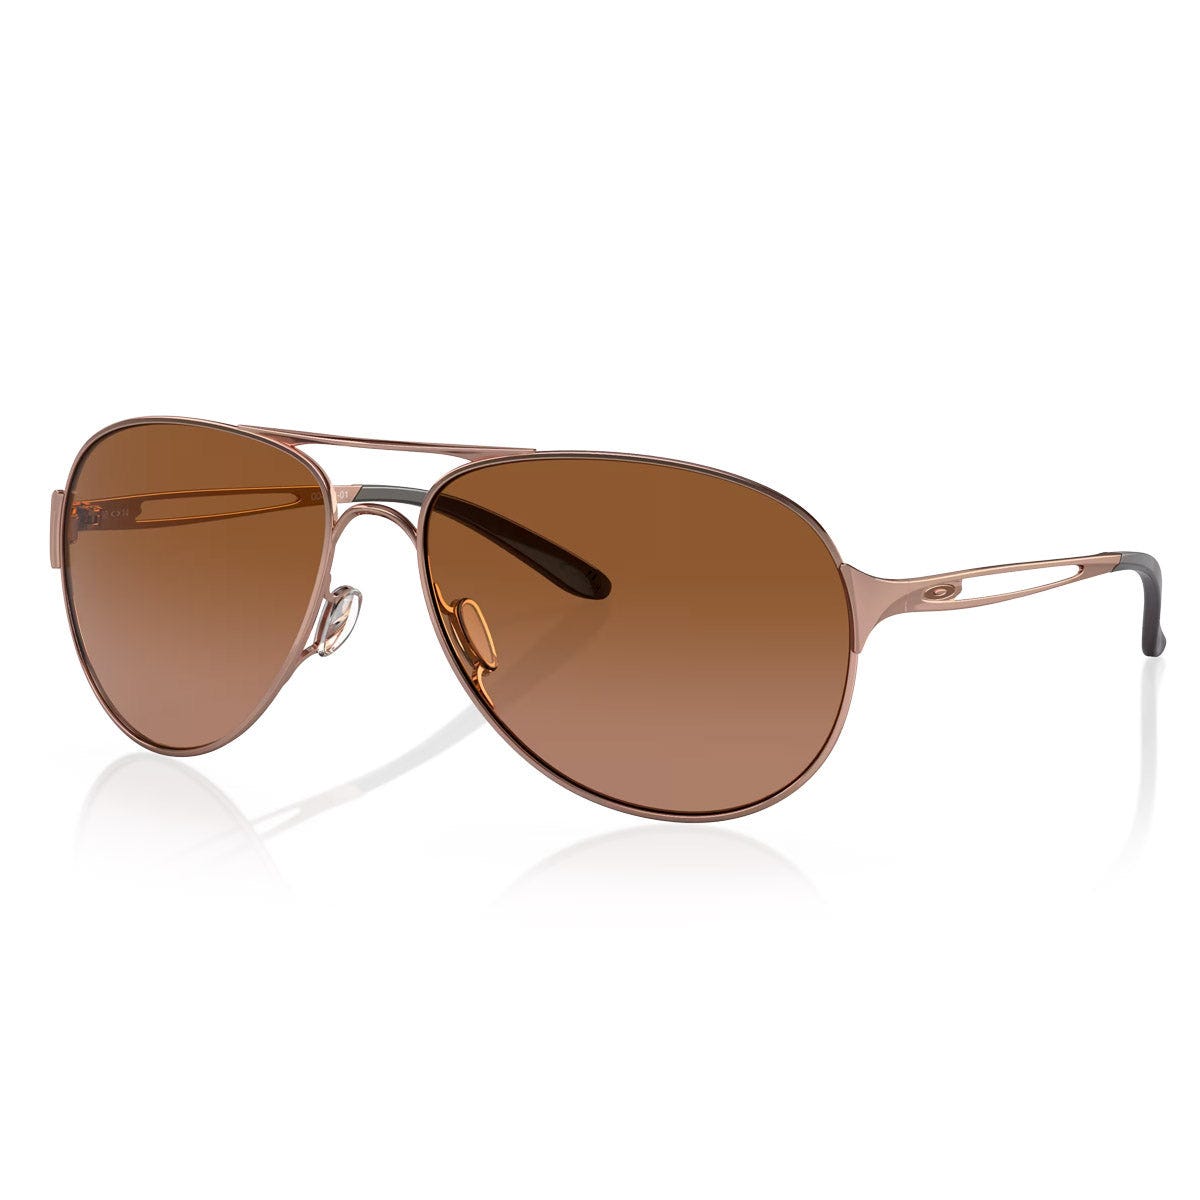 Aviator-style sunglasses with slim bronze-toned metal frames and brown gradient lenses.